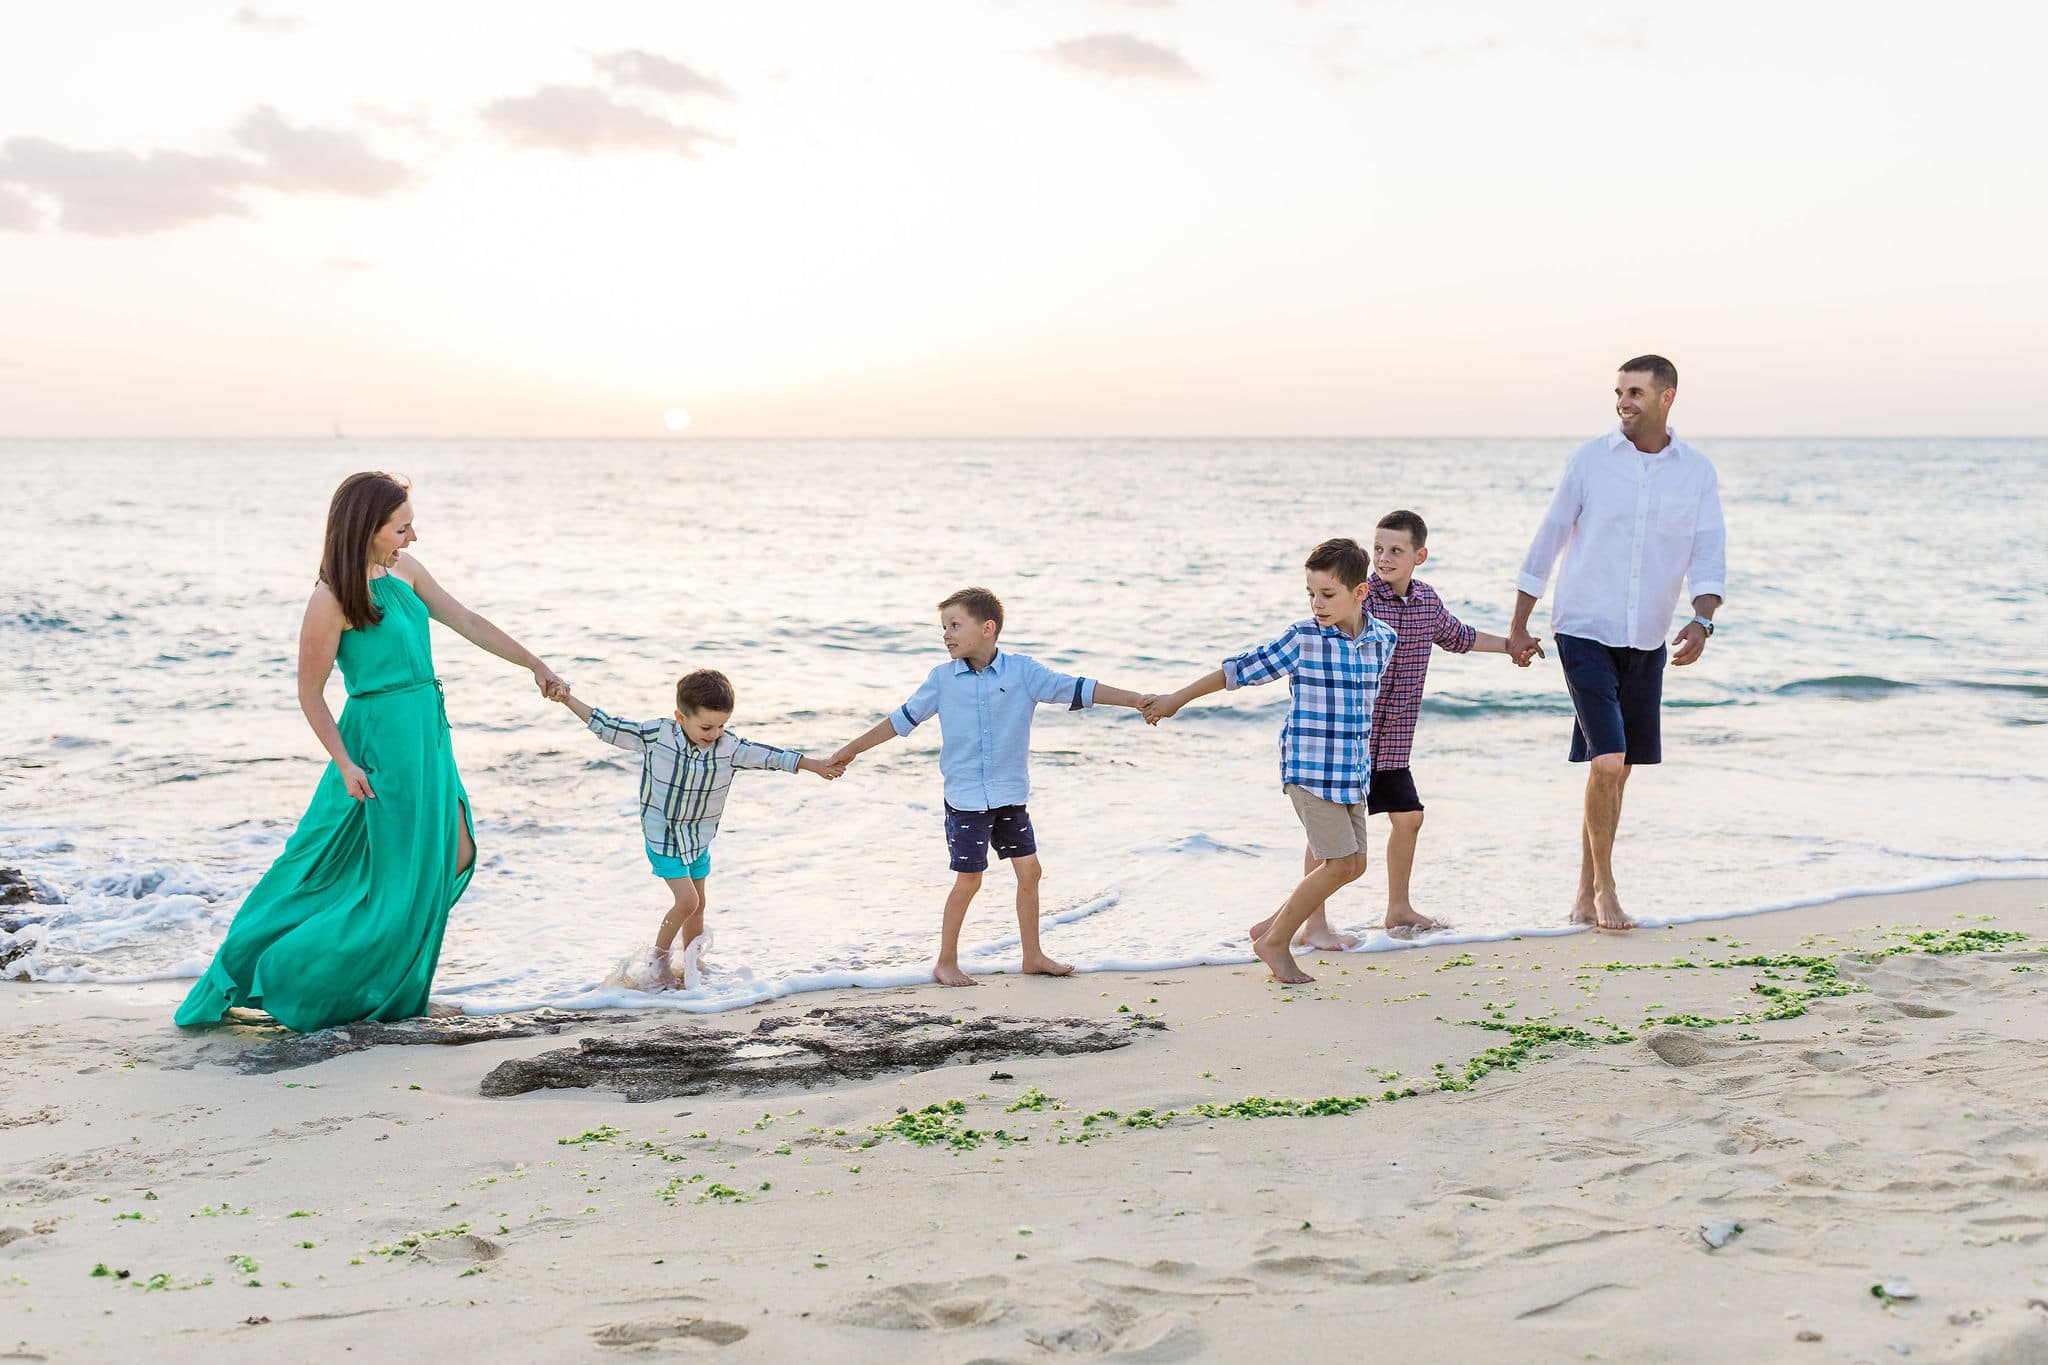 How to ruin your photo session -10 tips for family photoshoot. What not to do for your family photos